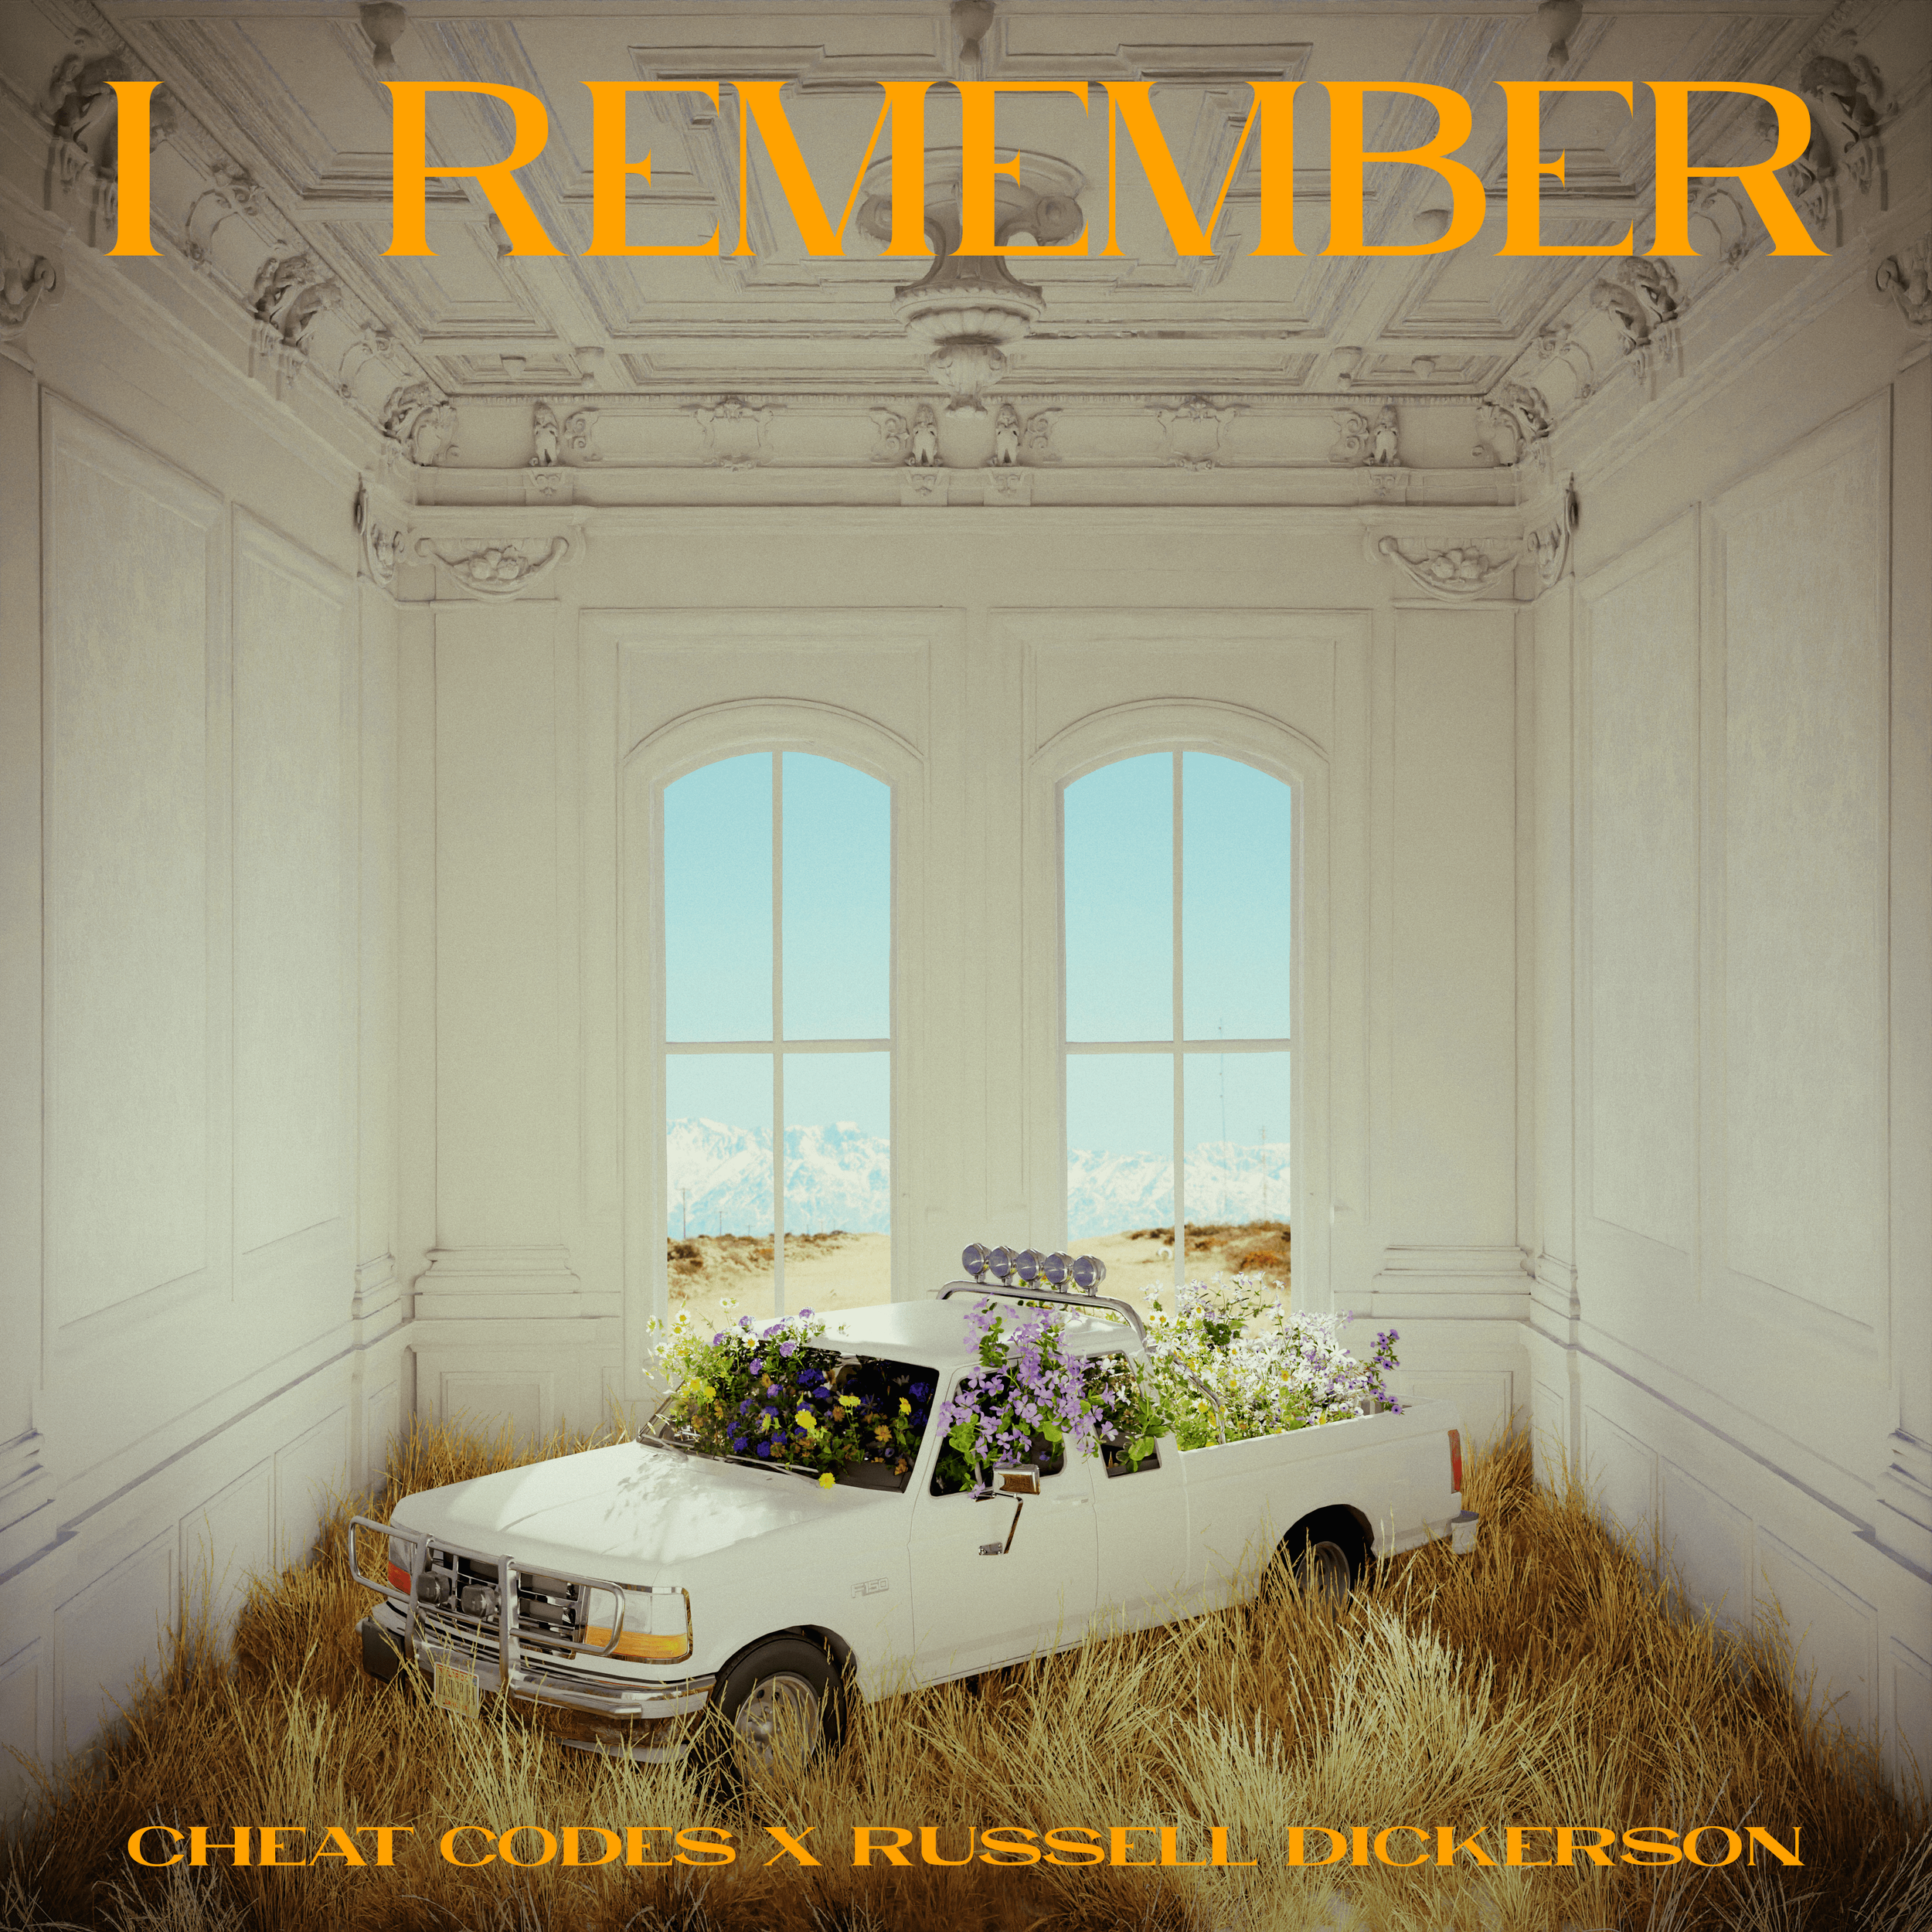 I REMEMBER (1).png